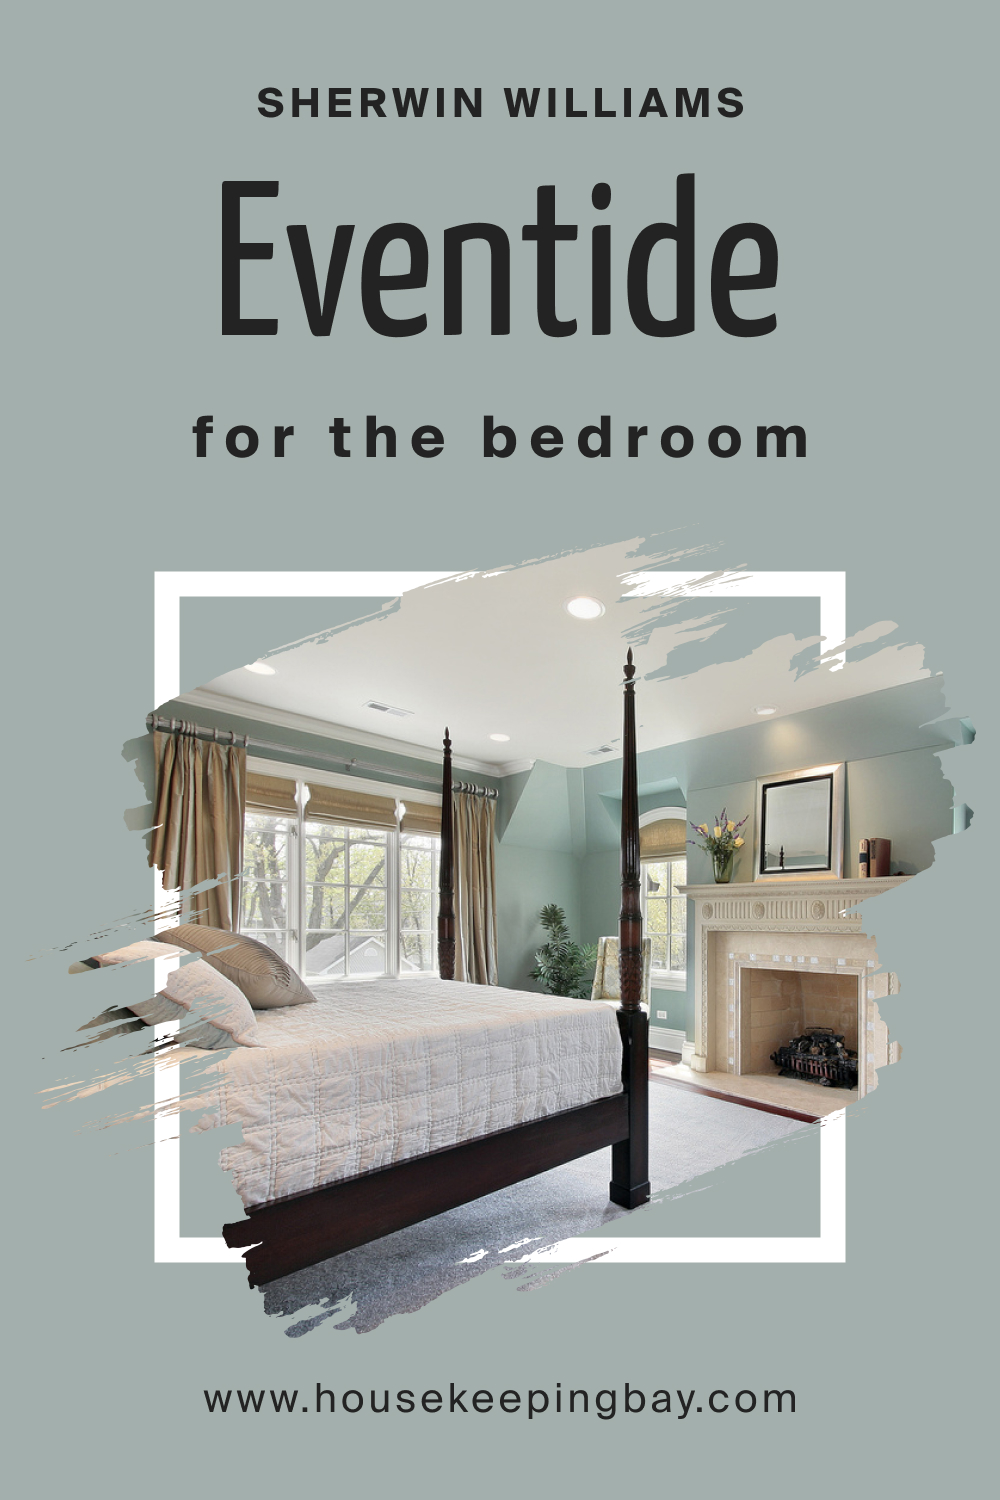 Sherwin Williams. SW 9643 Eventide For the bedroom